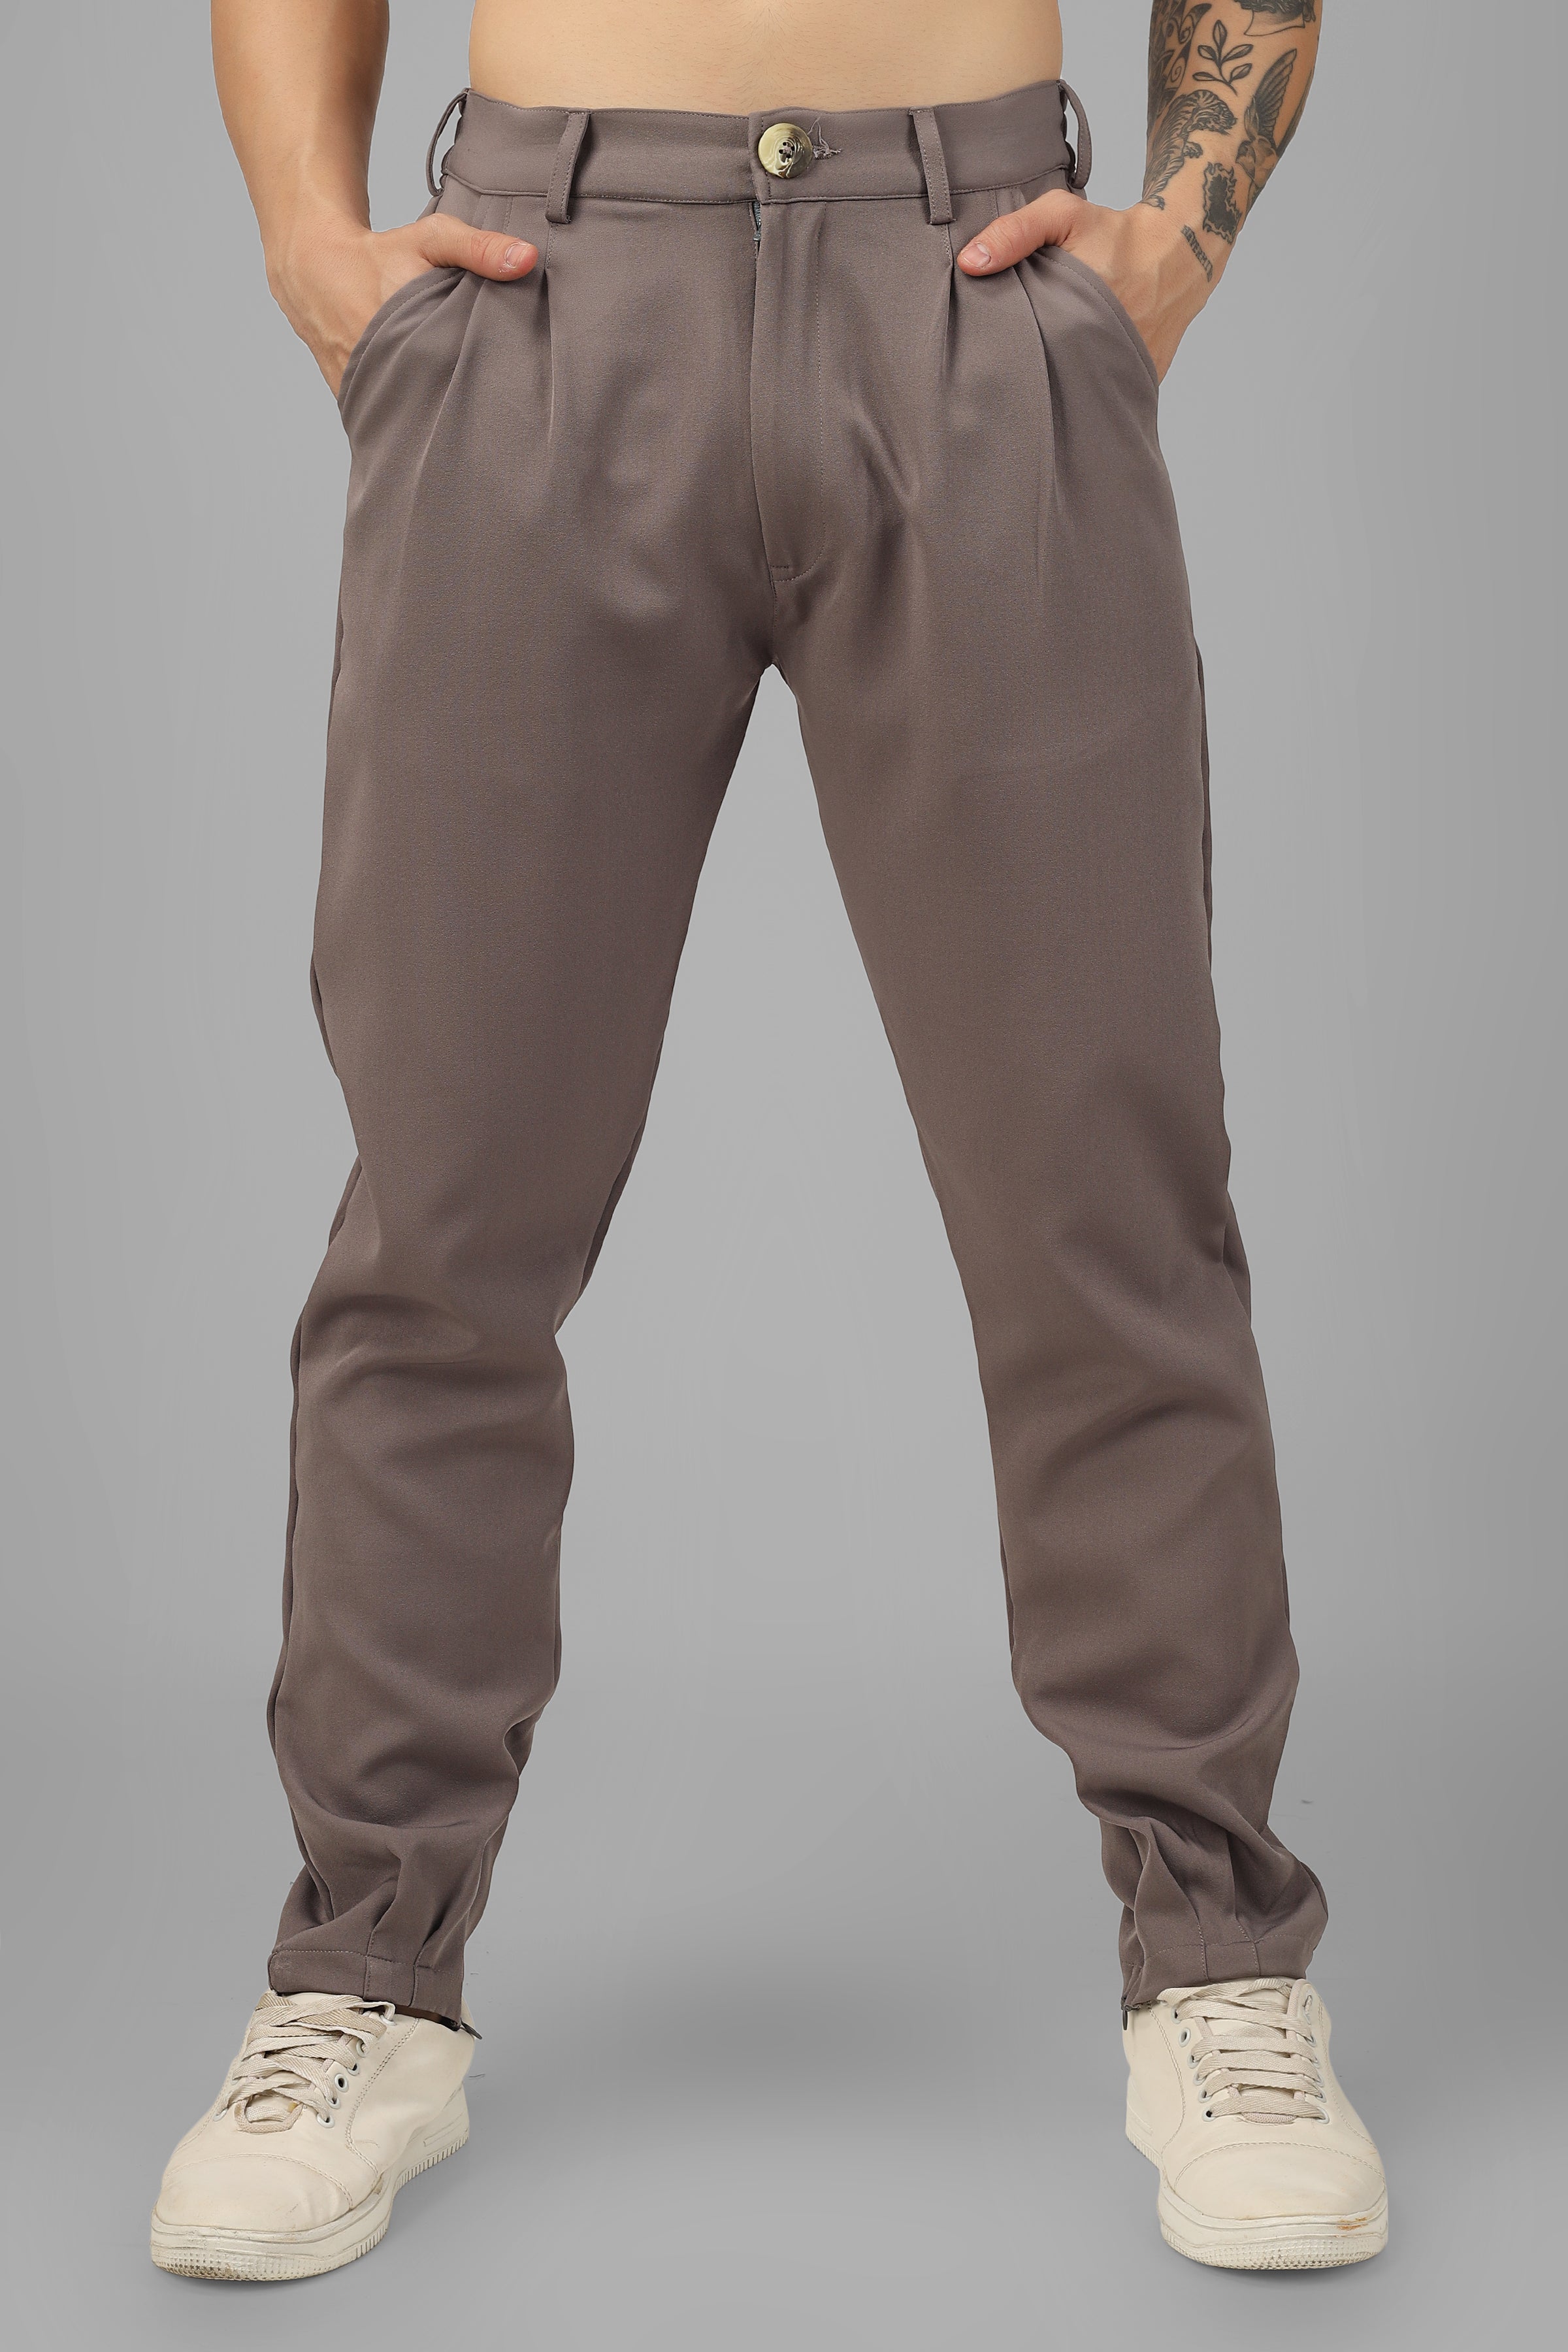 Stylish and Functional 6-Pocket Cargo Pants in Black